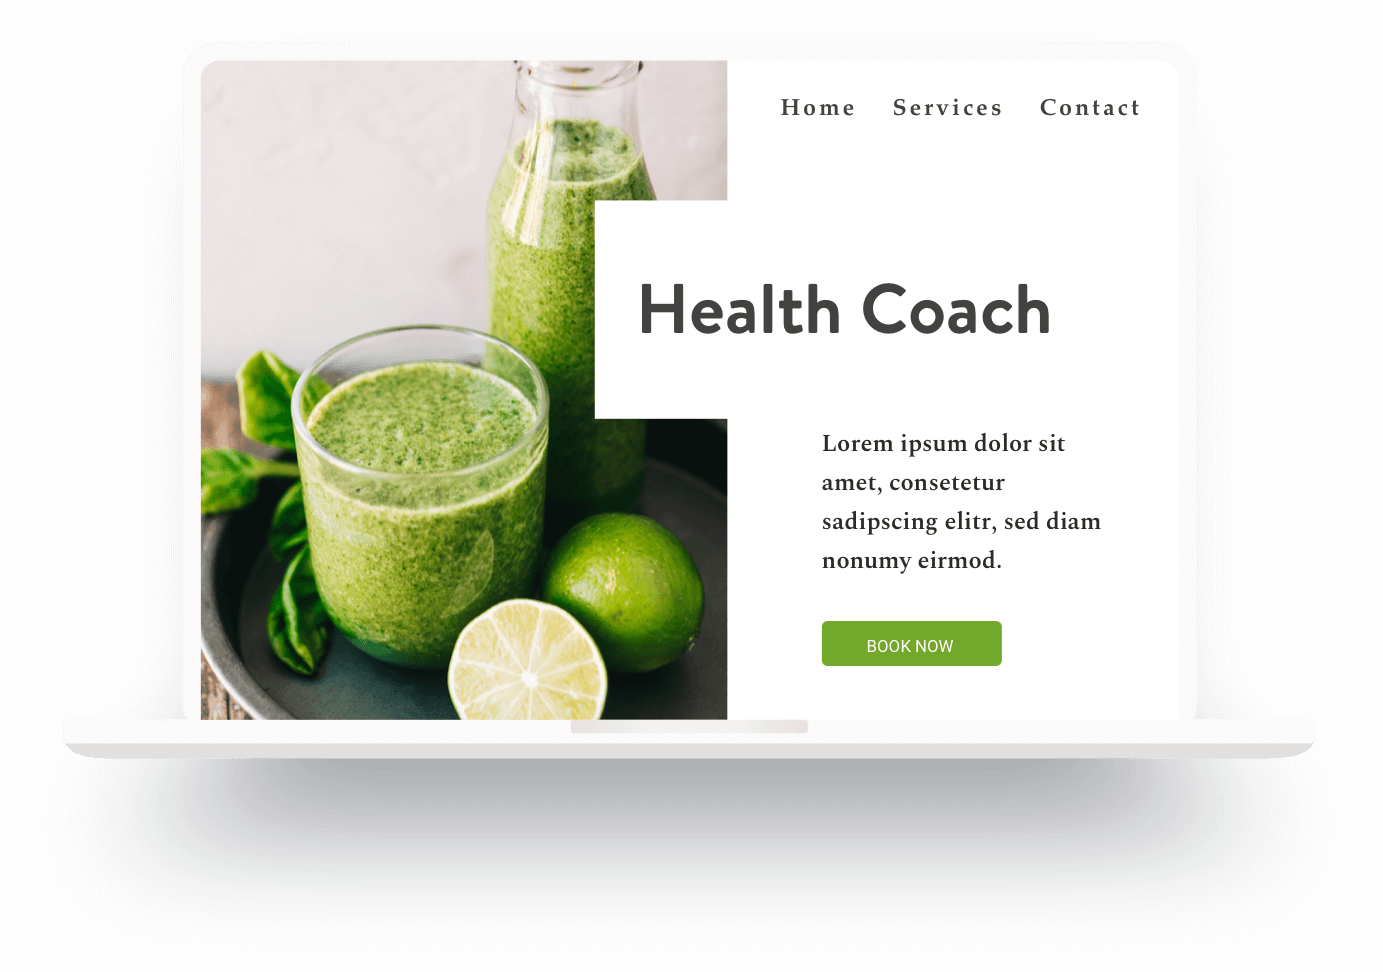 An example of a health coach's website made with Jimdo